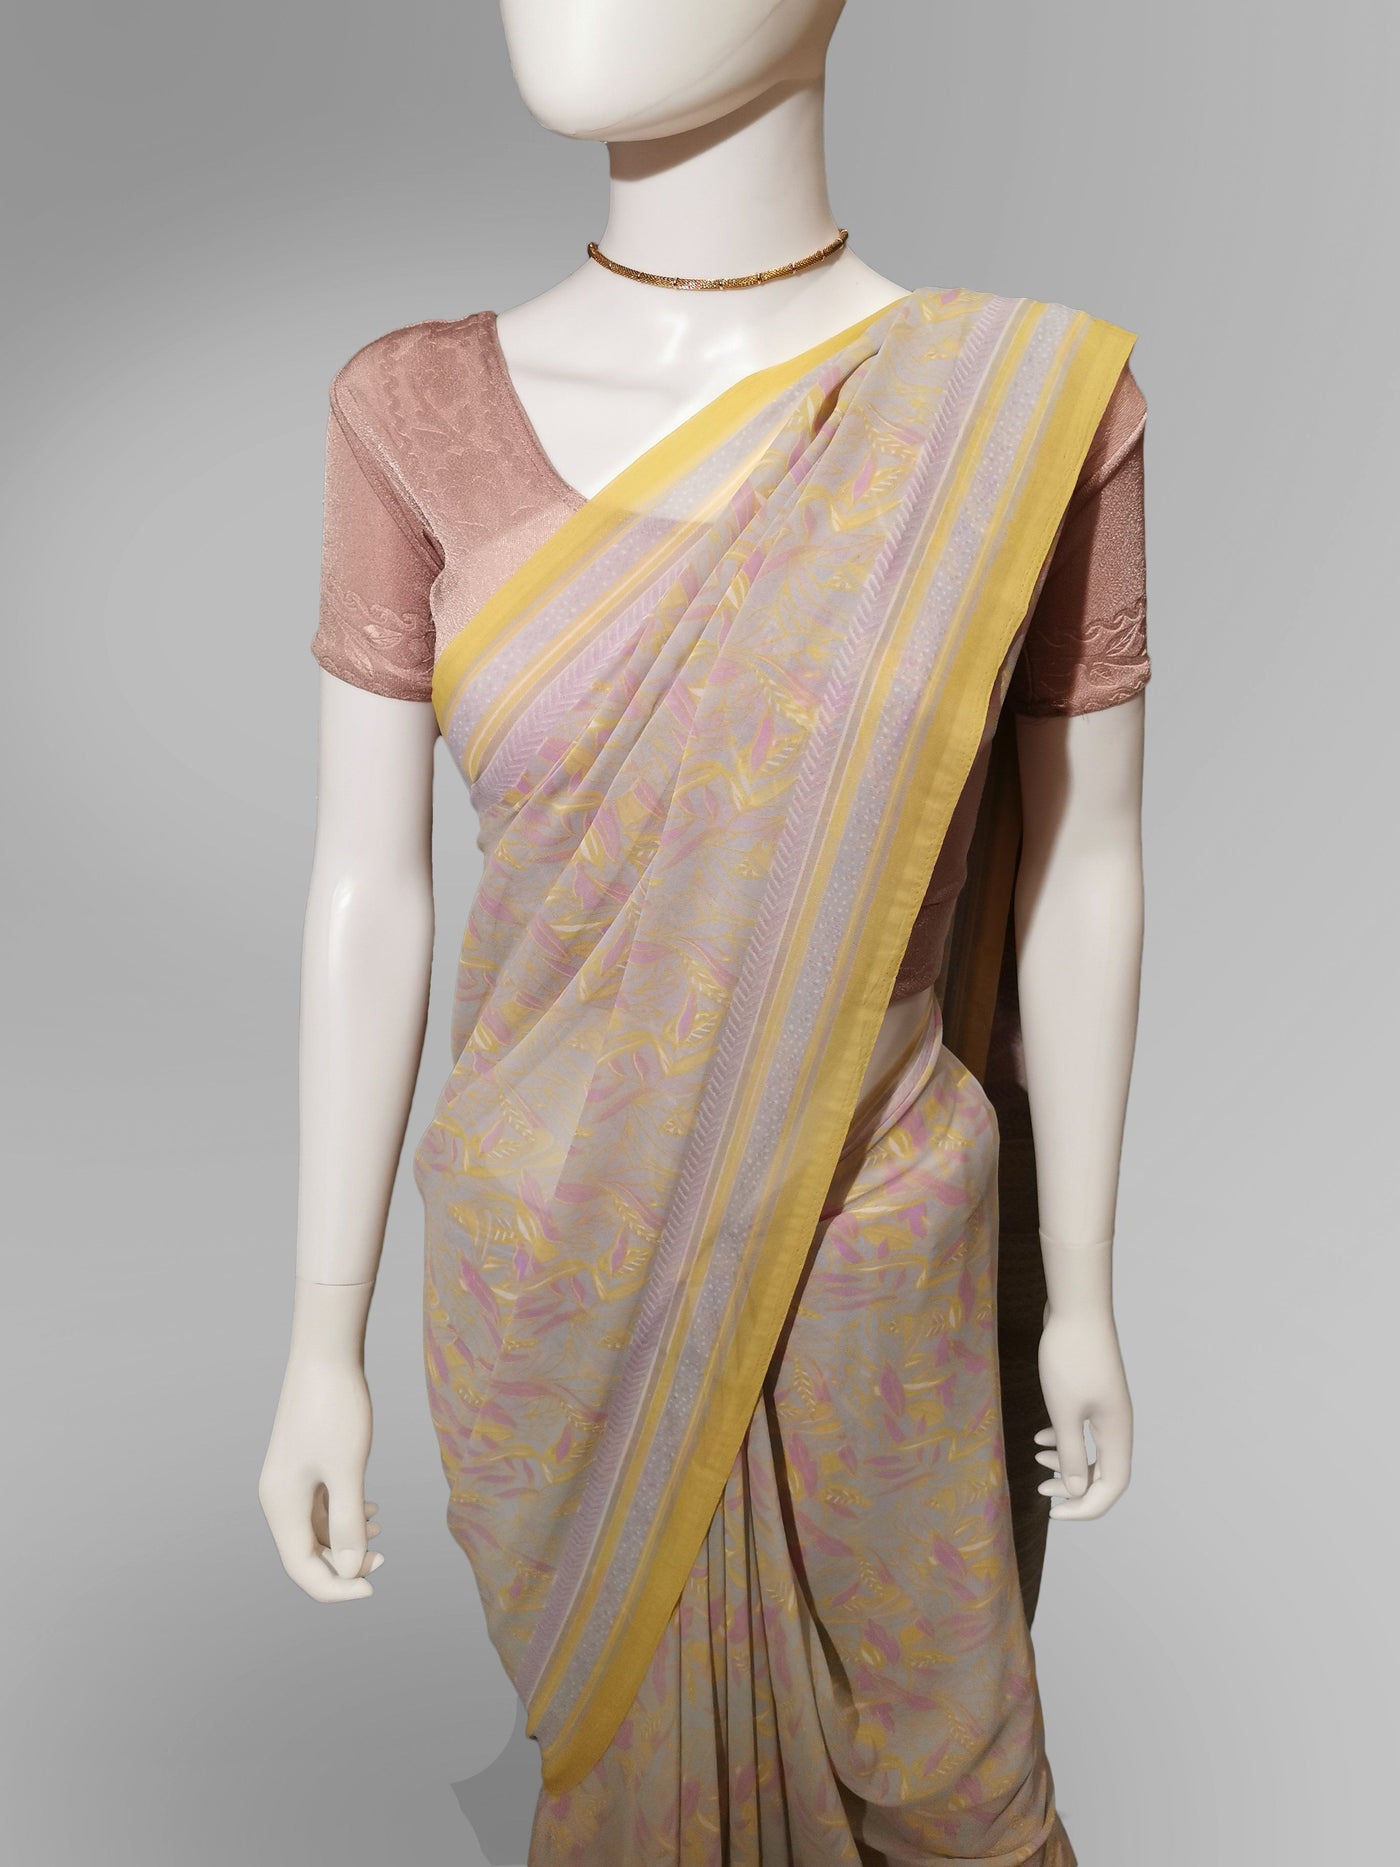 Saree in Light Peach Pink and Yellow with Traditional Print Indian Clothing in Denver, CO, Aurora, CO, Boulder, CO, Fort Collins, CO, Colorado Springs, CO, Parker, CO, Highlands Ranch, CO, Cherry Creek, CO, Centennial, CO, and Longmont, CO. NATIONWIDE SHIPPING USA- India Fashion X